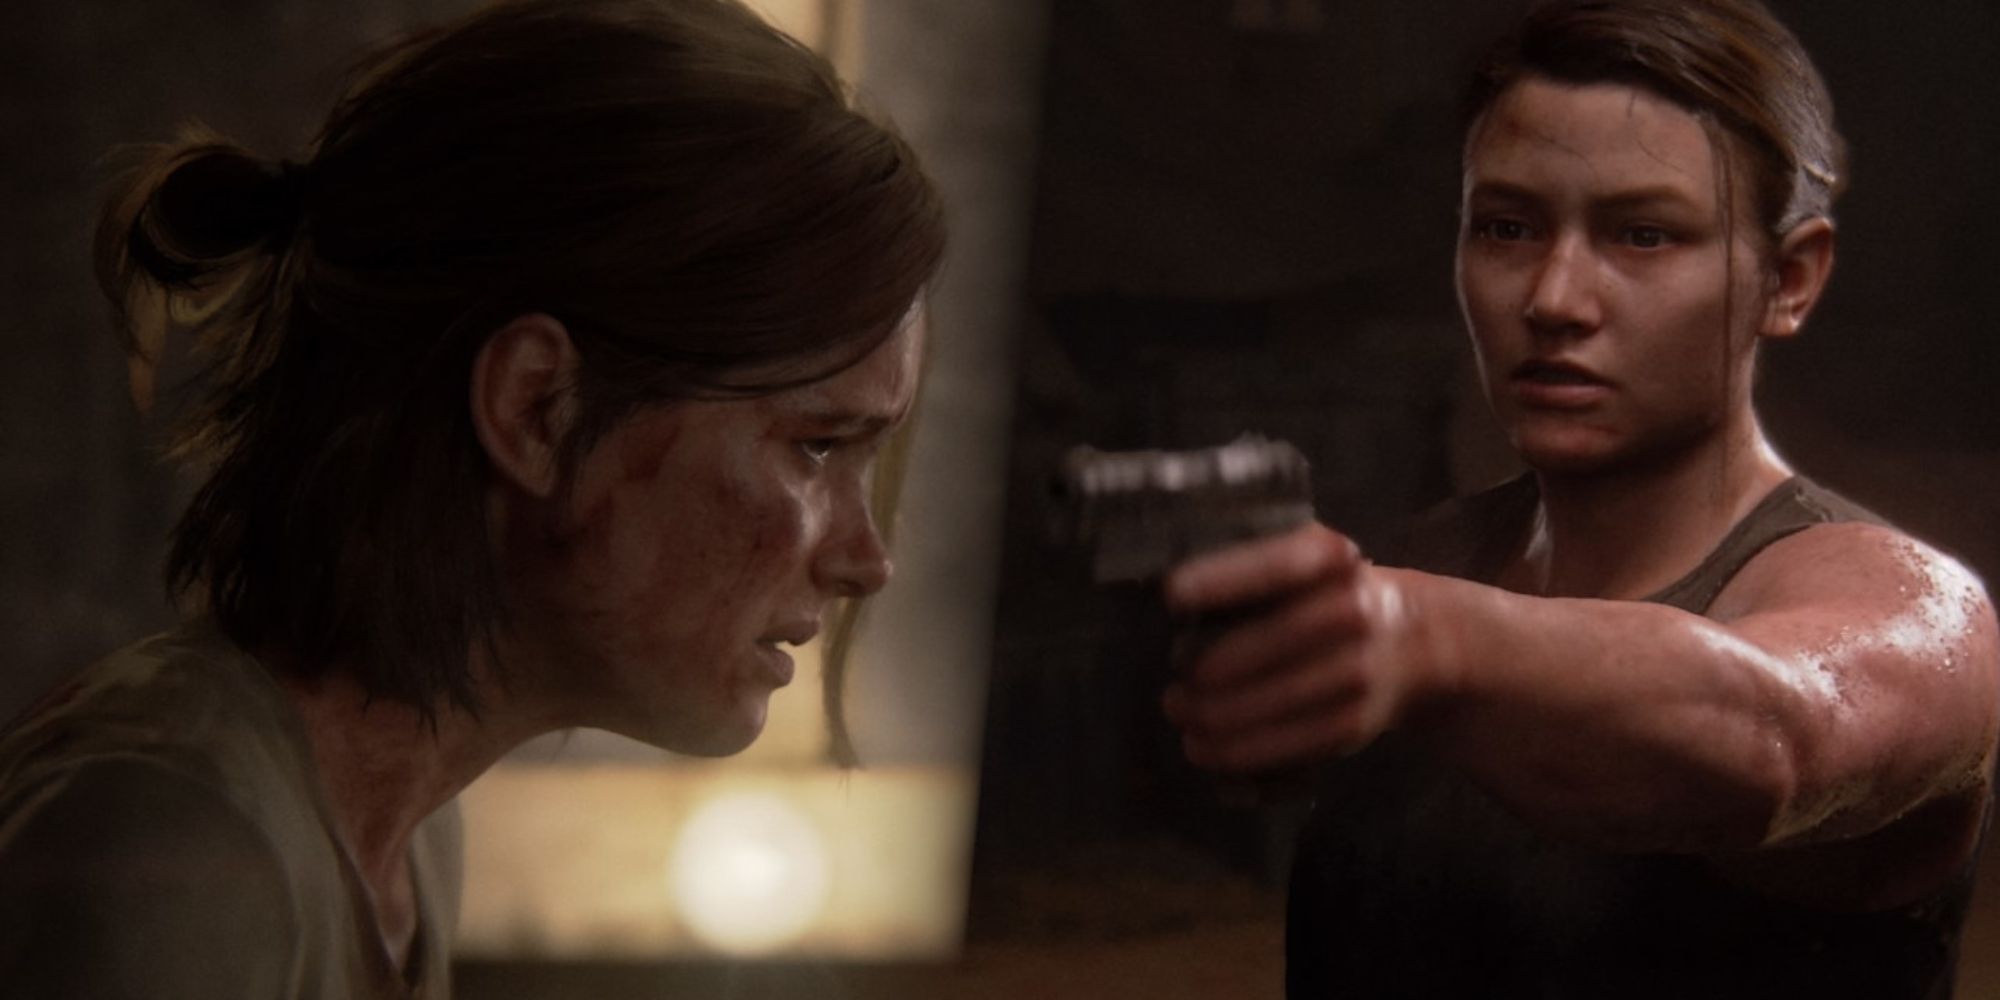 Ellie and Abby from The Last of Us 2